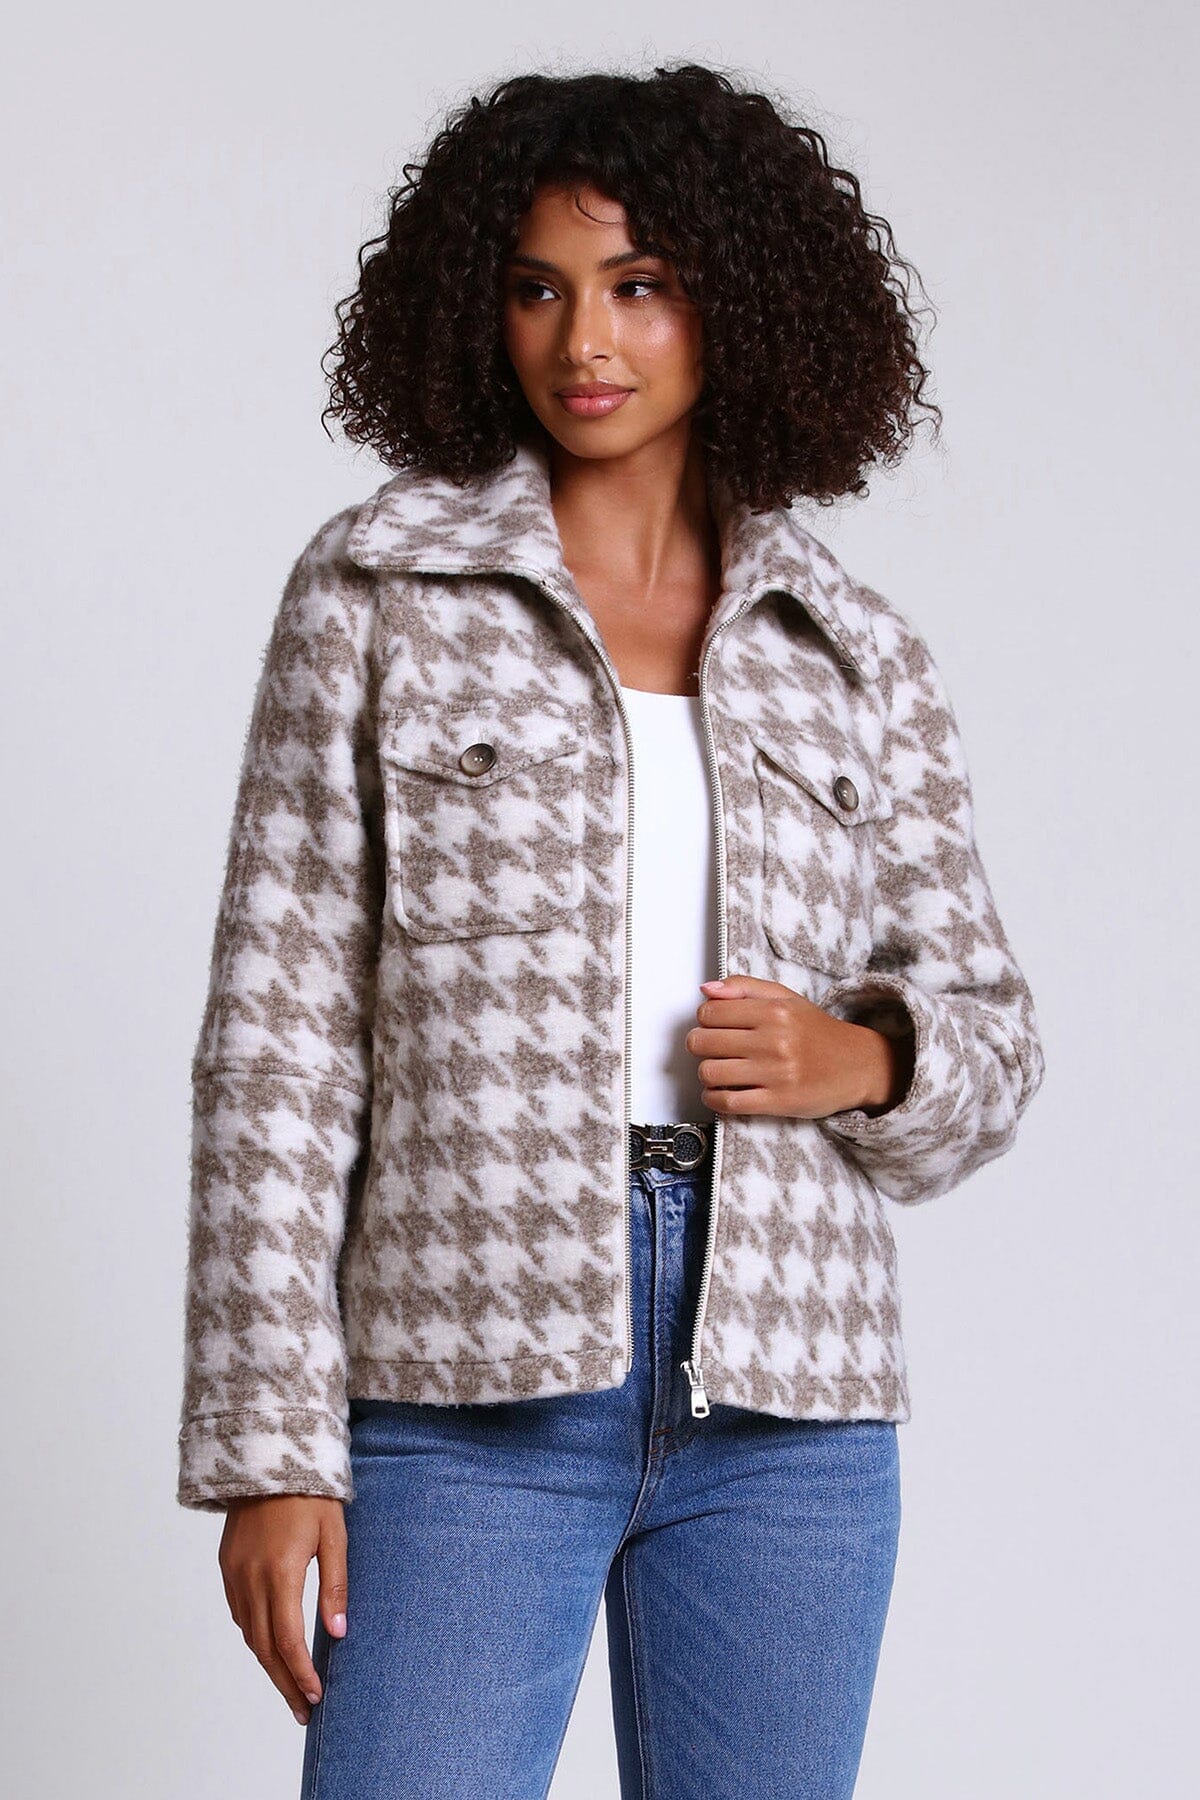 printed full zip up front jacket shacket coat neutral tan beige and cream plaid -